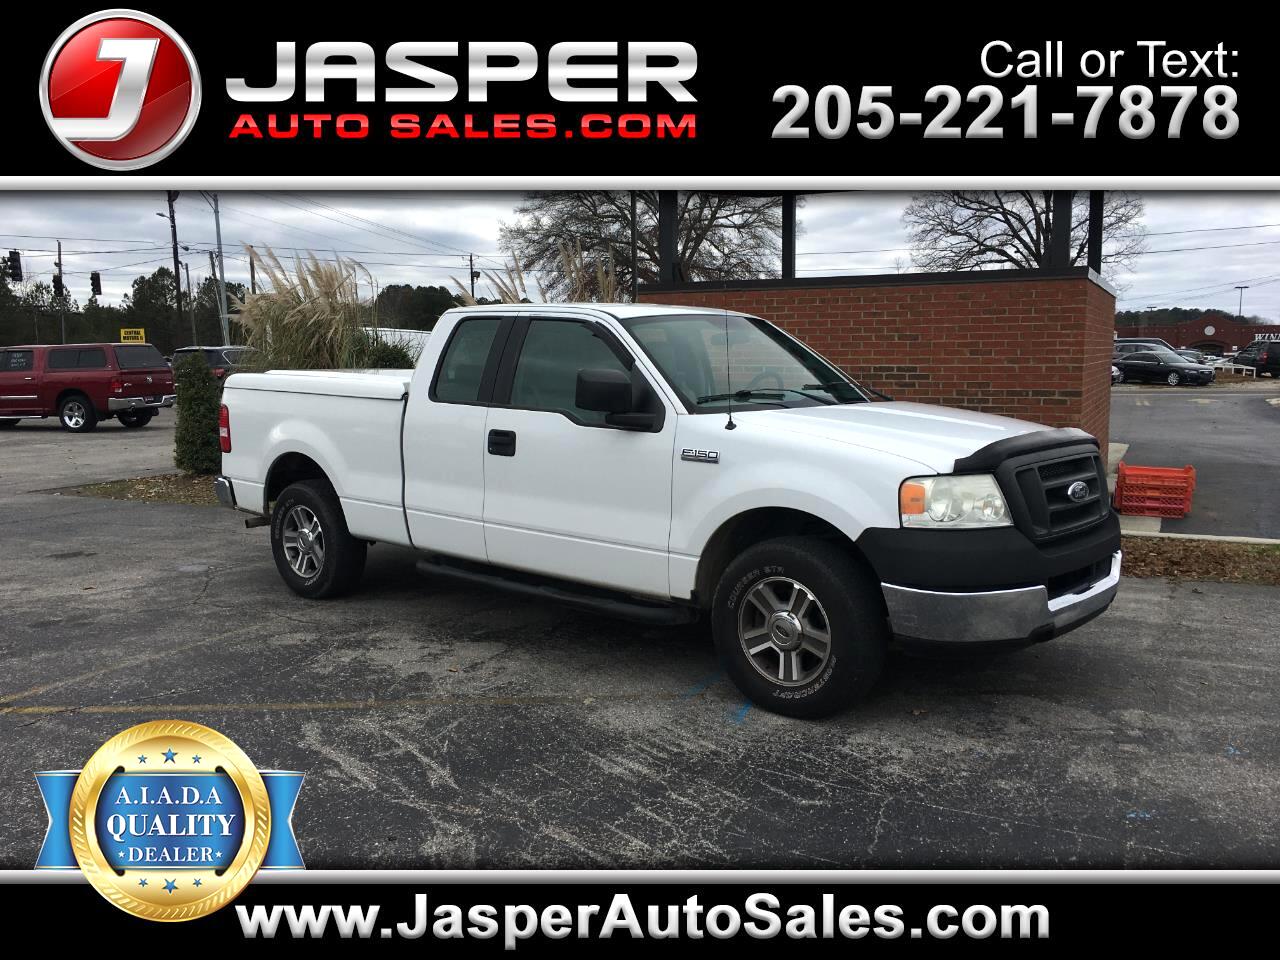 Used 2005 Ford F 150 Supercab 145 Xl For Sale In Jasper Al